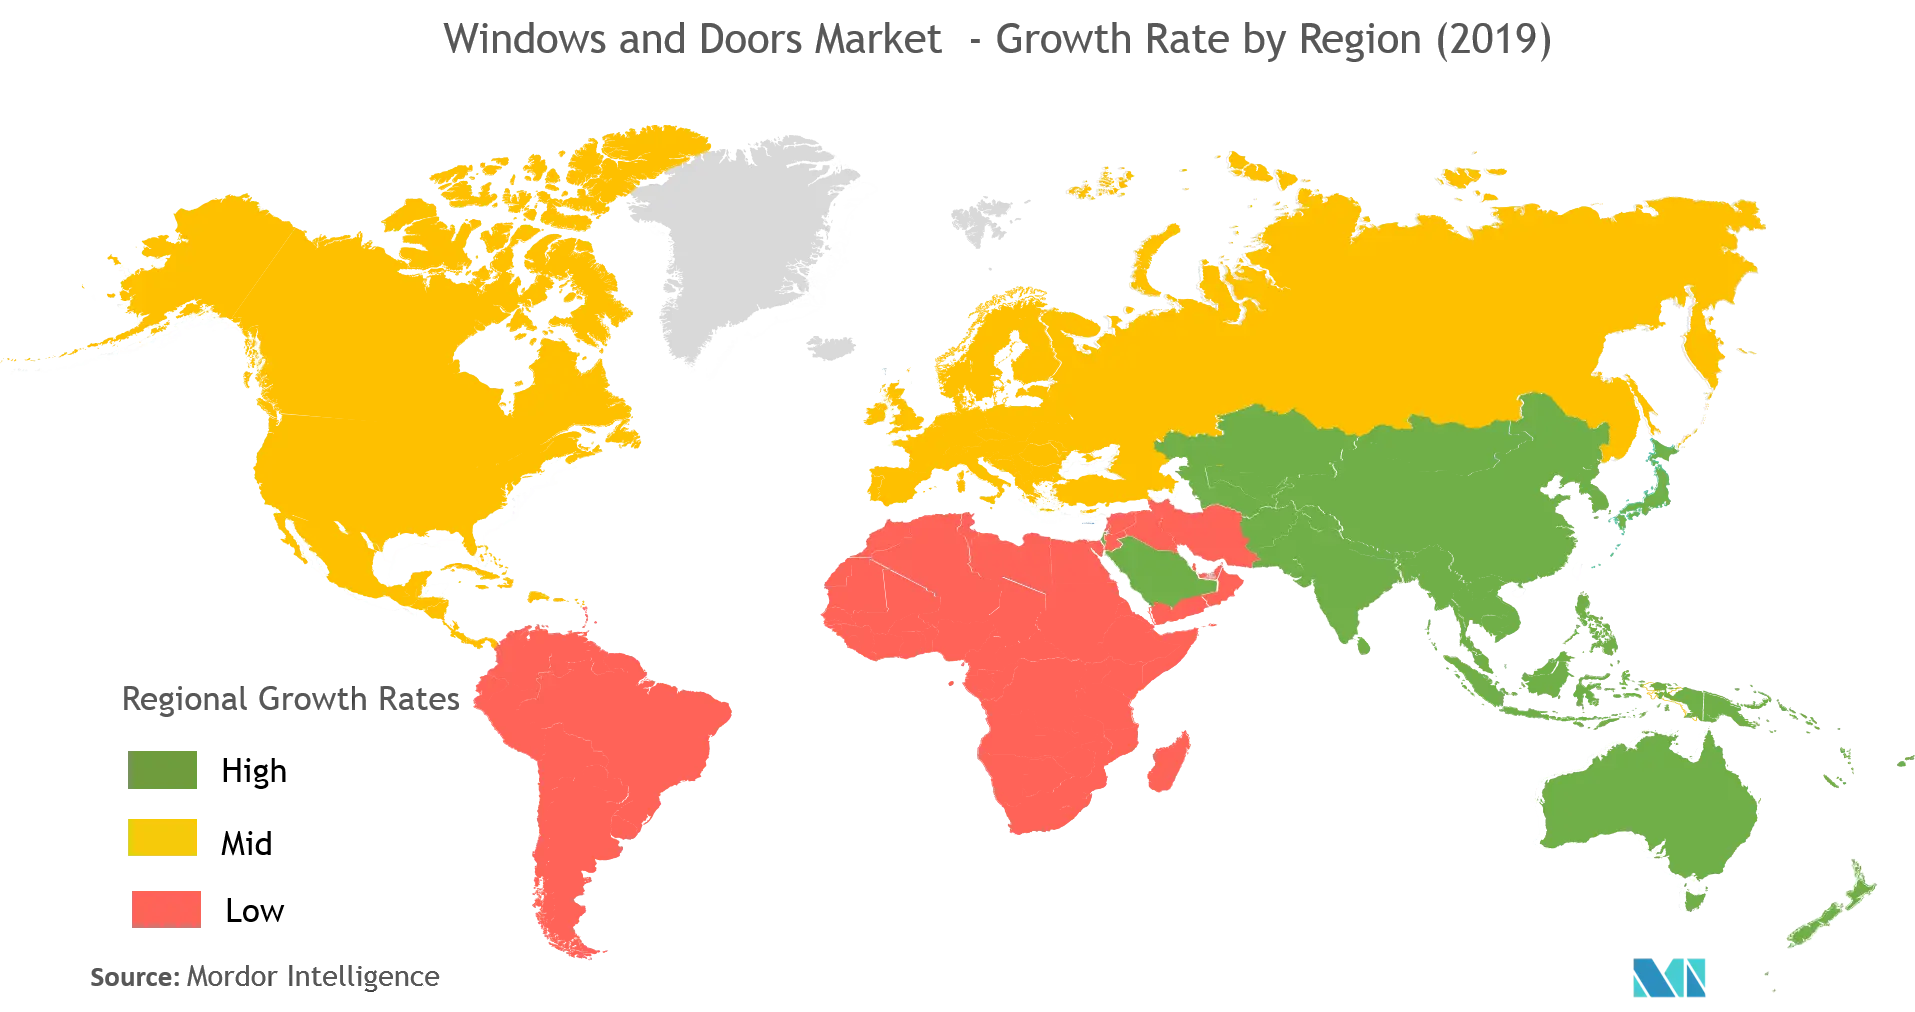 Windows and Doors Market - Growth Rate by Region (2019)